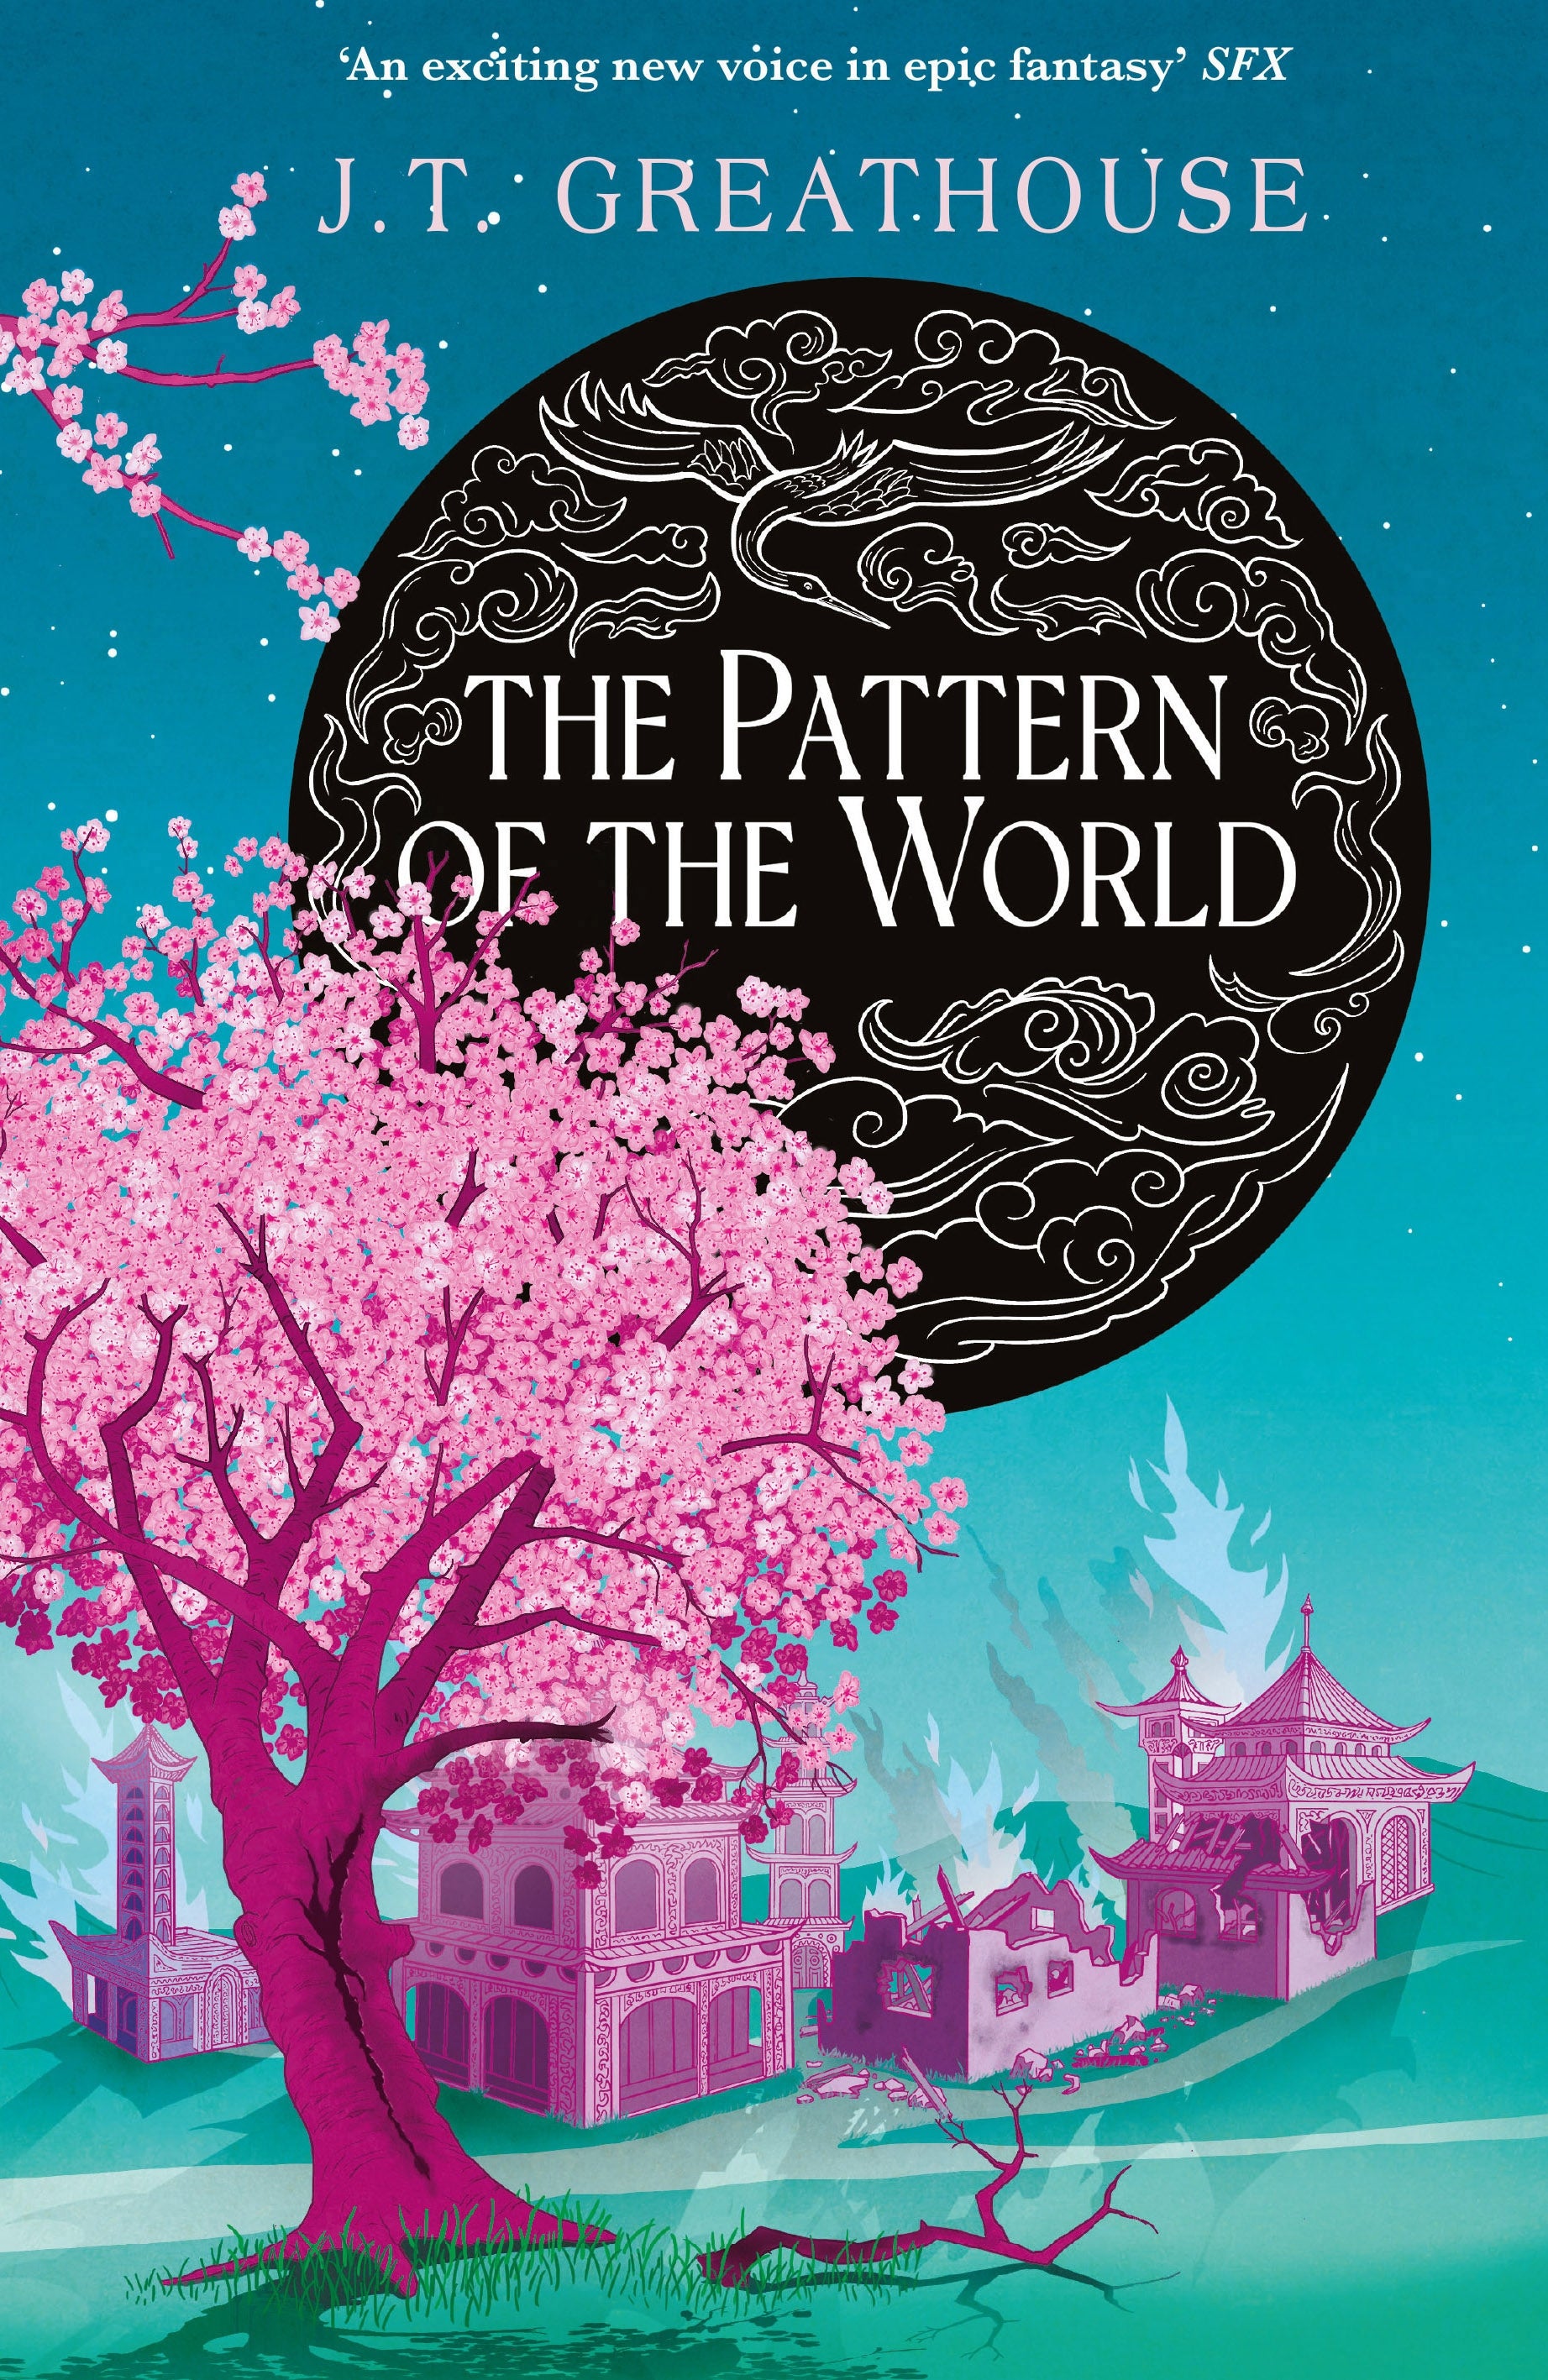 The Pattern of the World by J.T. Greathouse